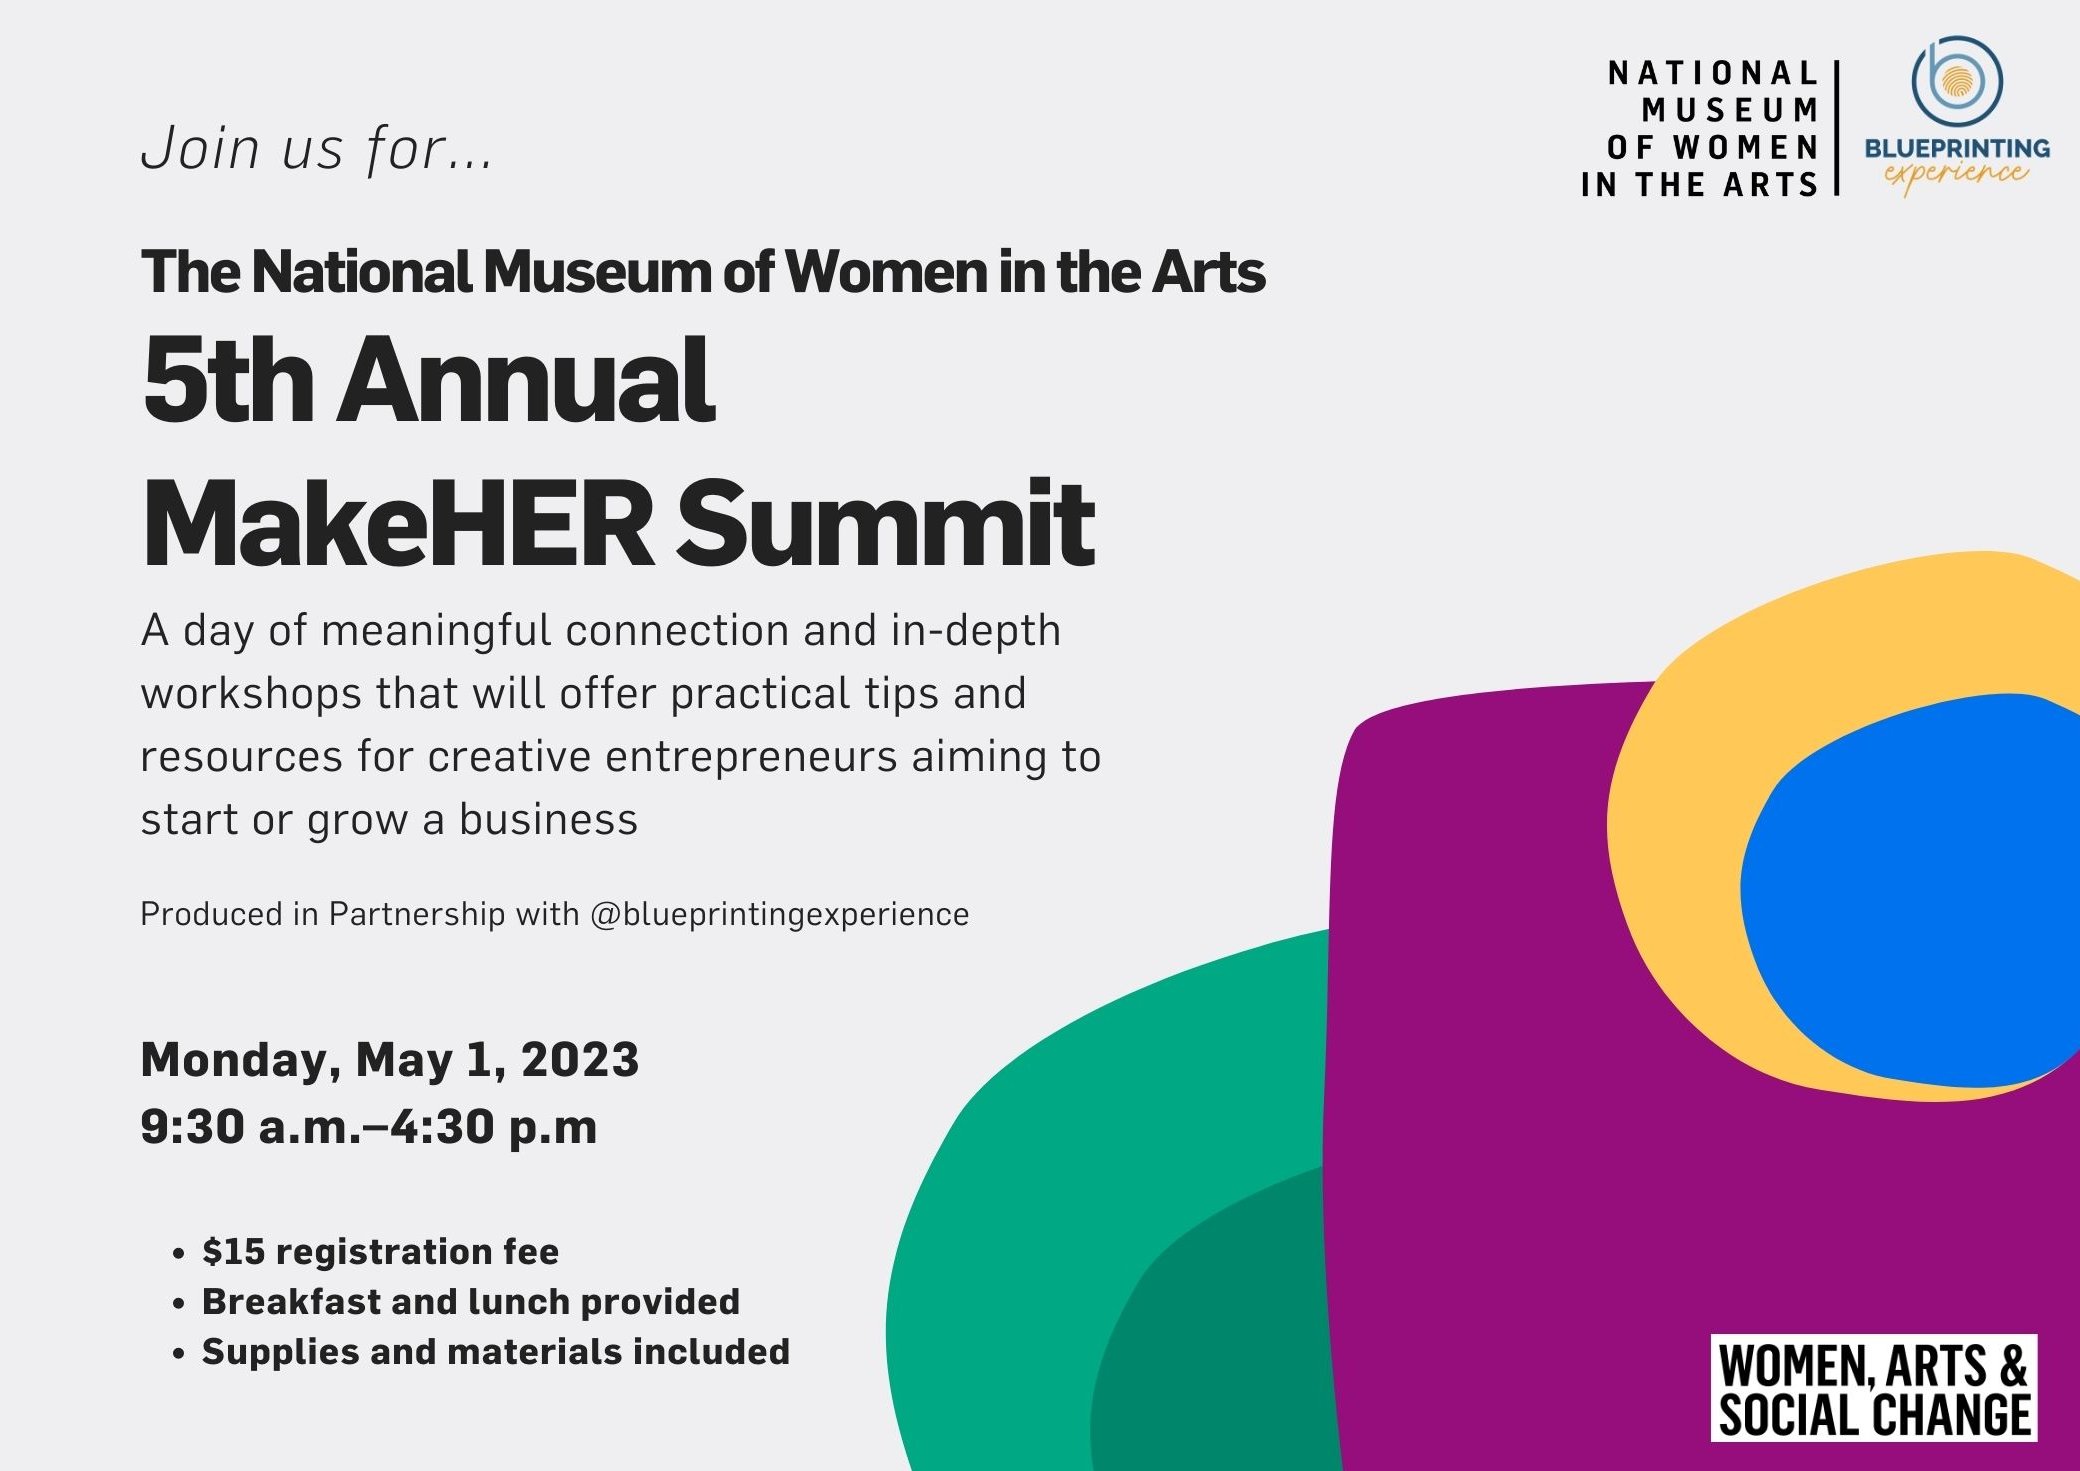 Fifth Annual MakeHER Summit Workshops